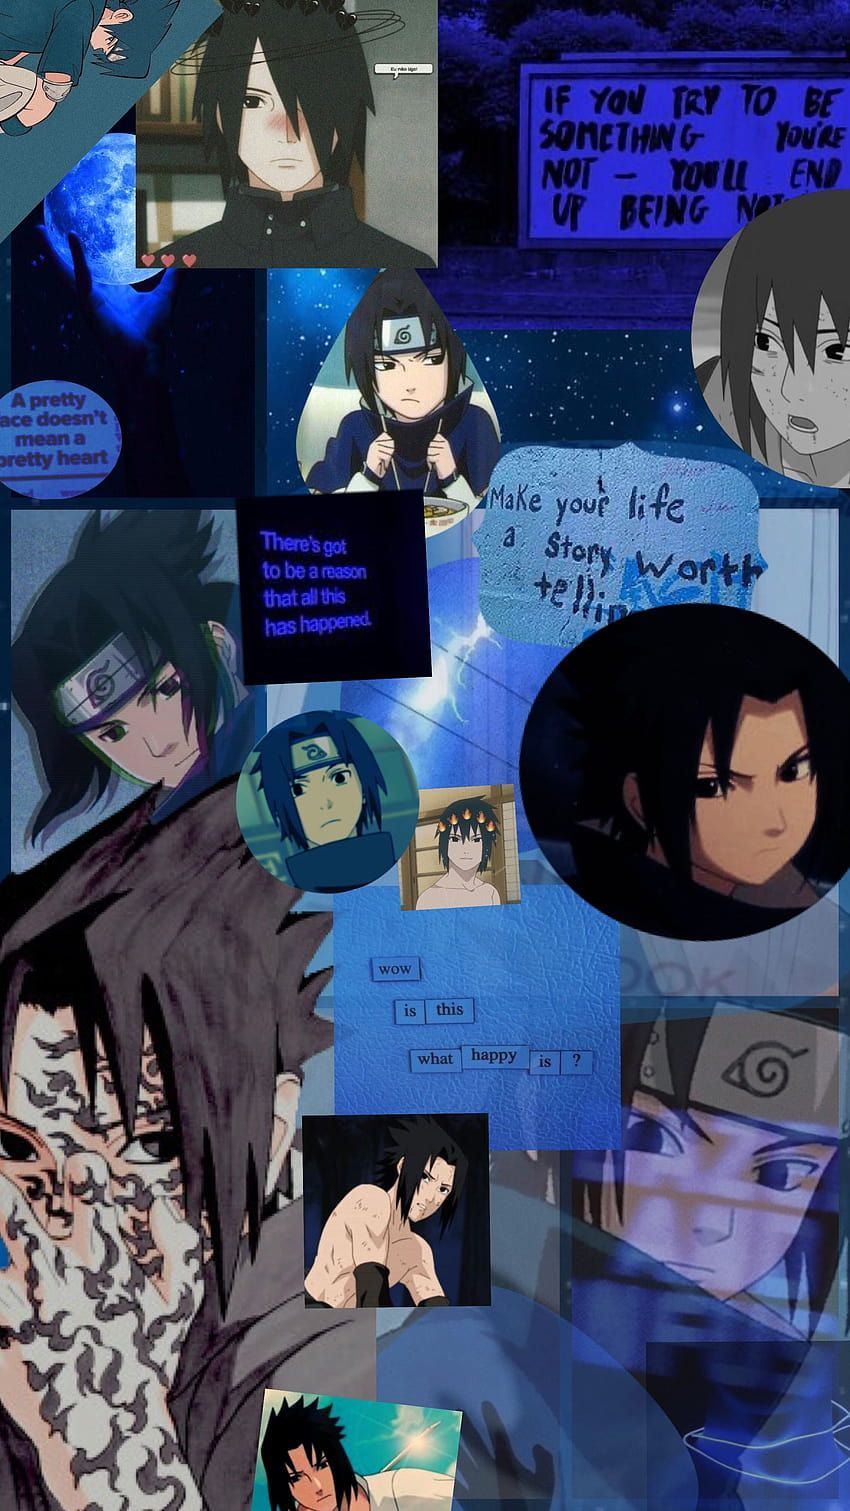 A collage of images with text and captions - Sasuke Uchiha